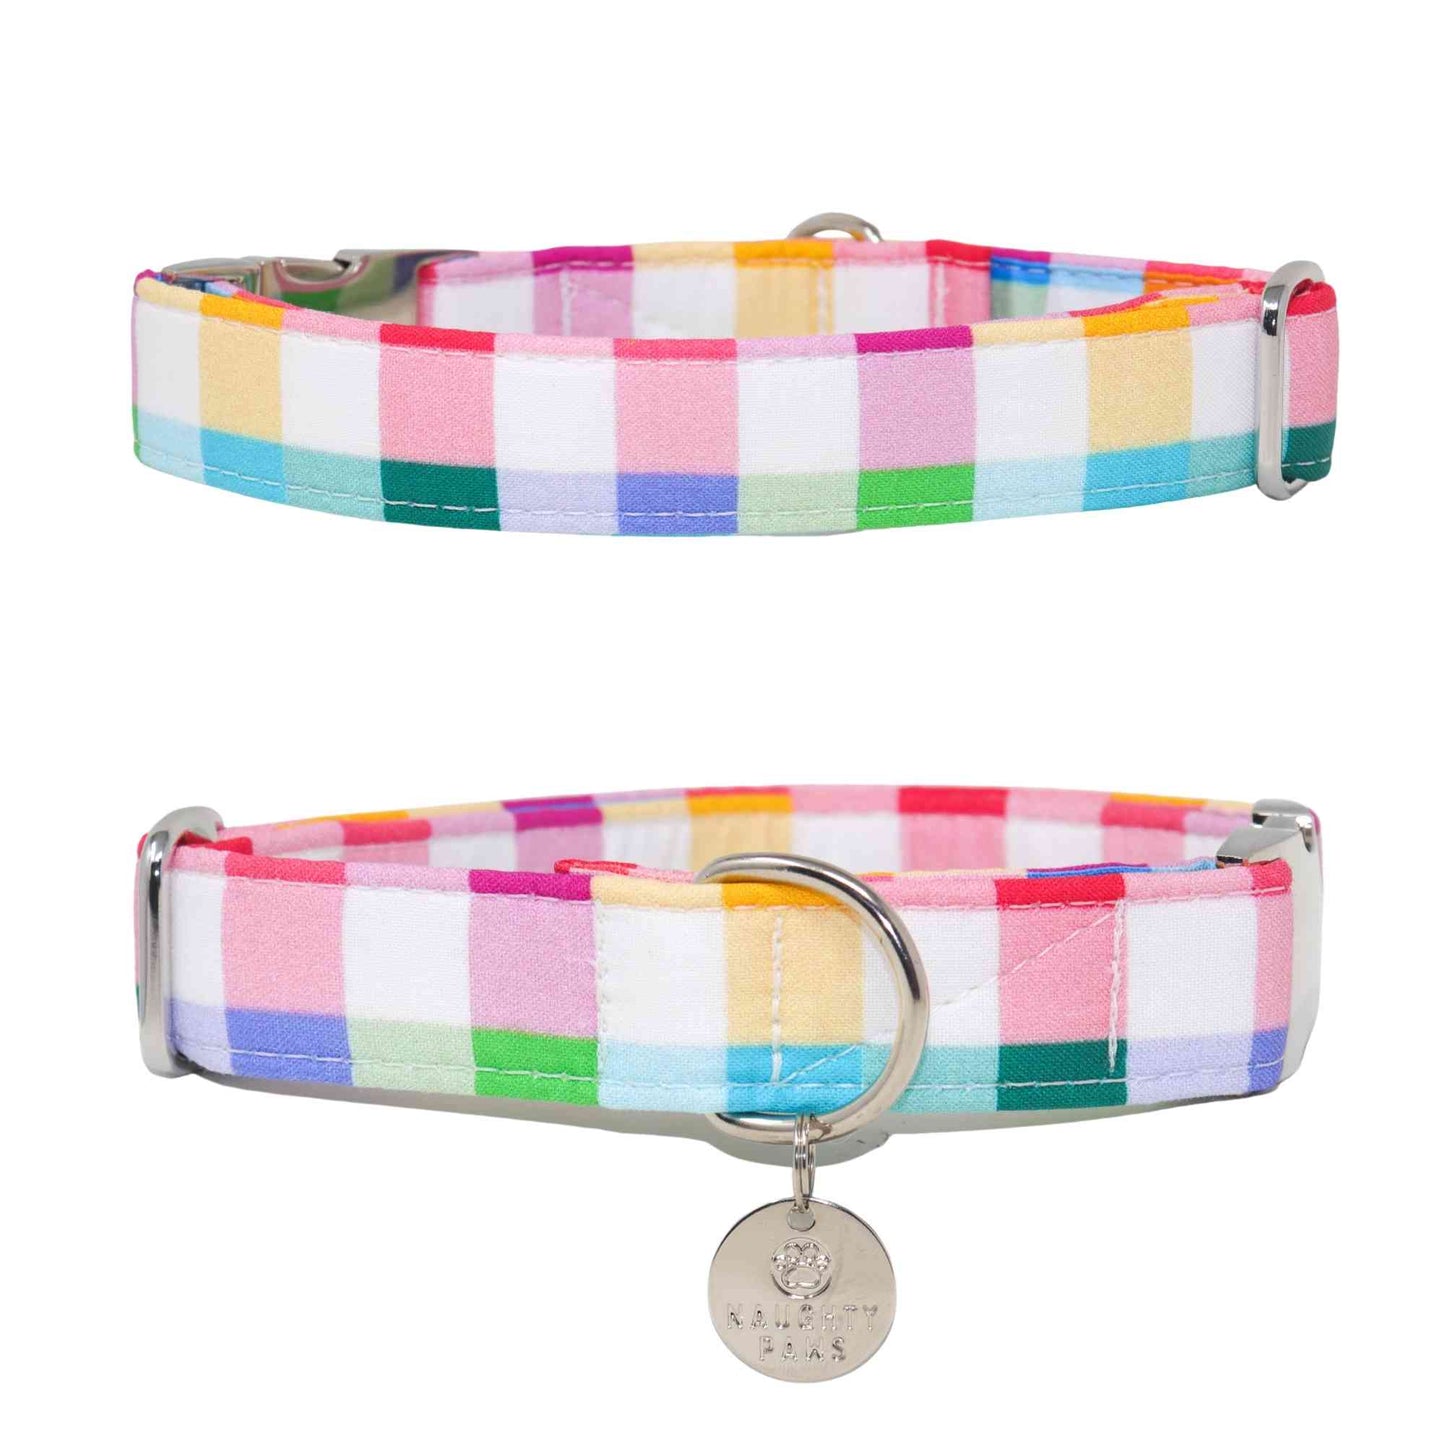 Looking for a unique and fun collar for your furry friend? Check out our "Checker Board" Multicolor Checker Neutral Dog Collar! Available in sizes ranging from extra extra small to extra large, our collar is designed to fit dogs of all sizes. The colorful checkerboard pattern adds a playful touch to your pup's look, while the neutral tones ensure versatility and style. 